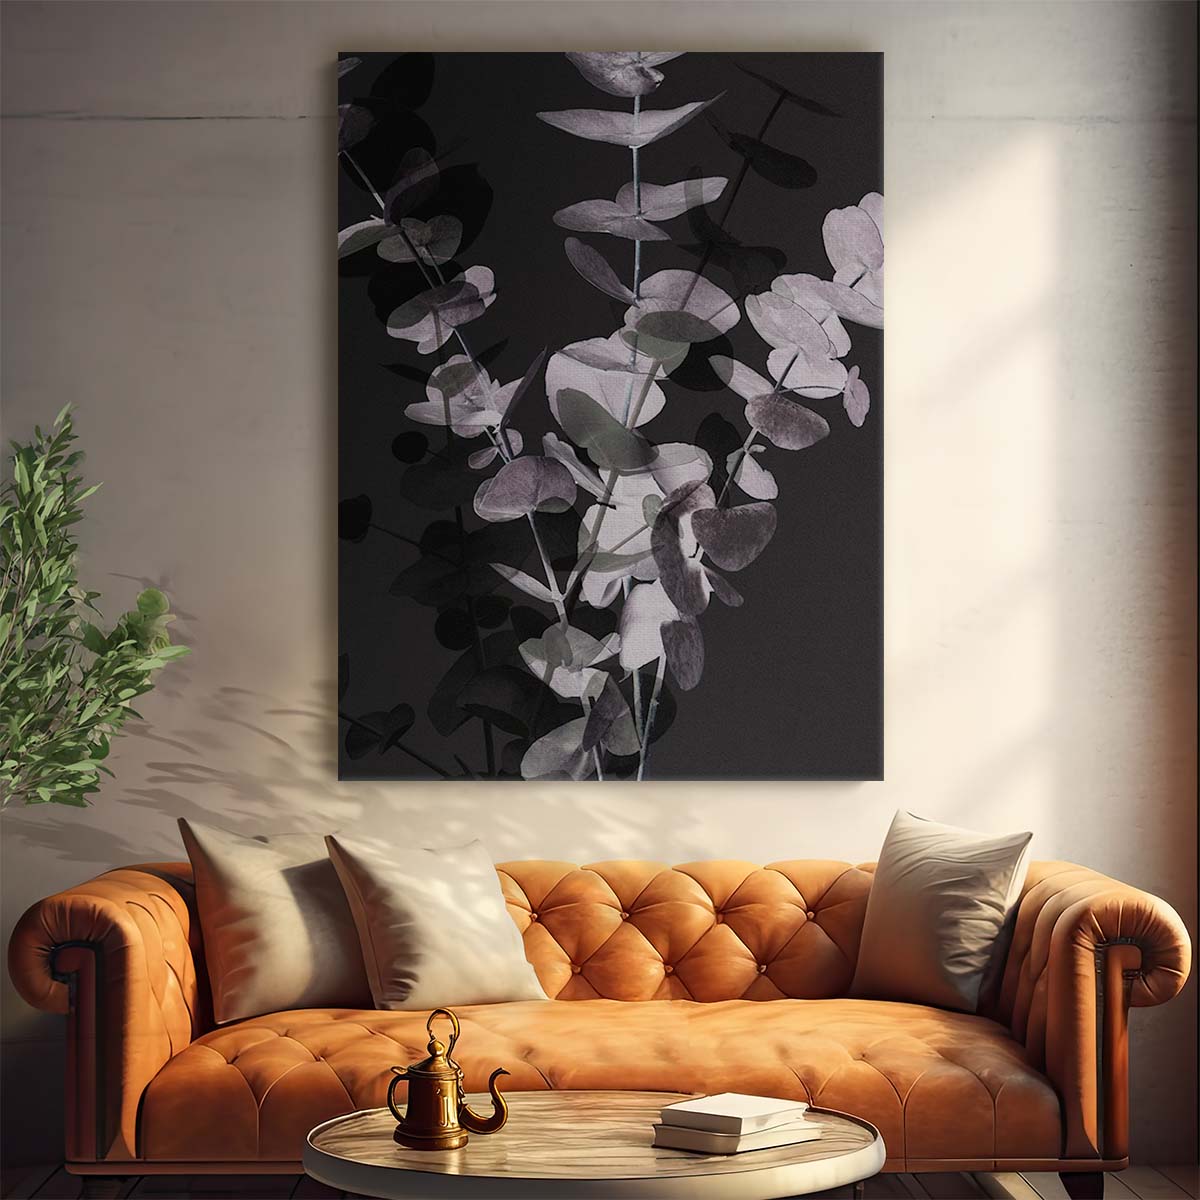 Eucalyptus Botanical Photography with Dark Abstract Texture by Luxuriance Designs, made in USA